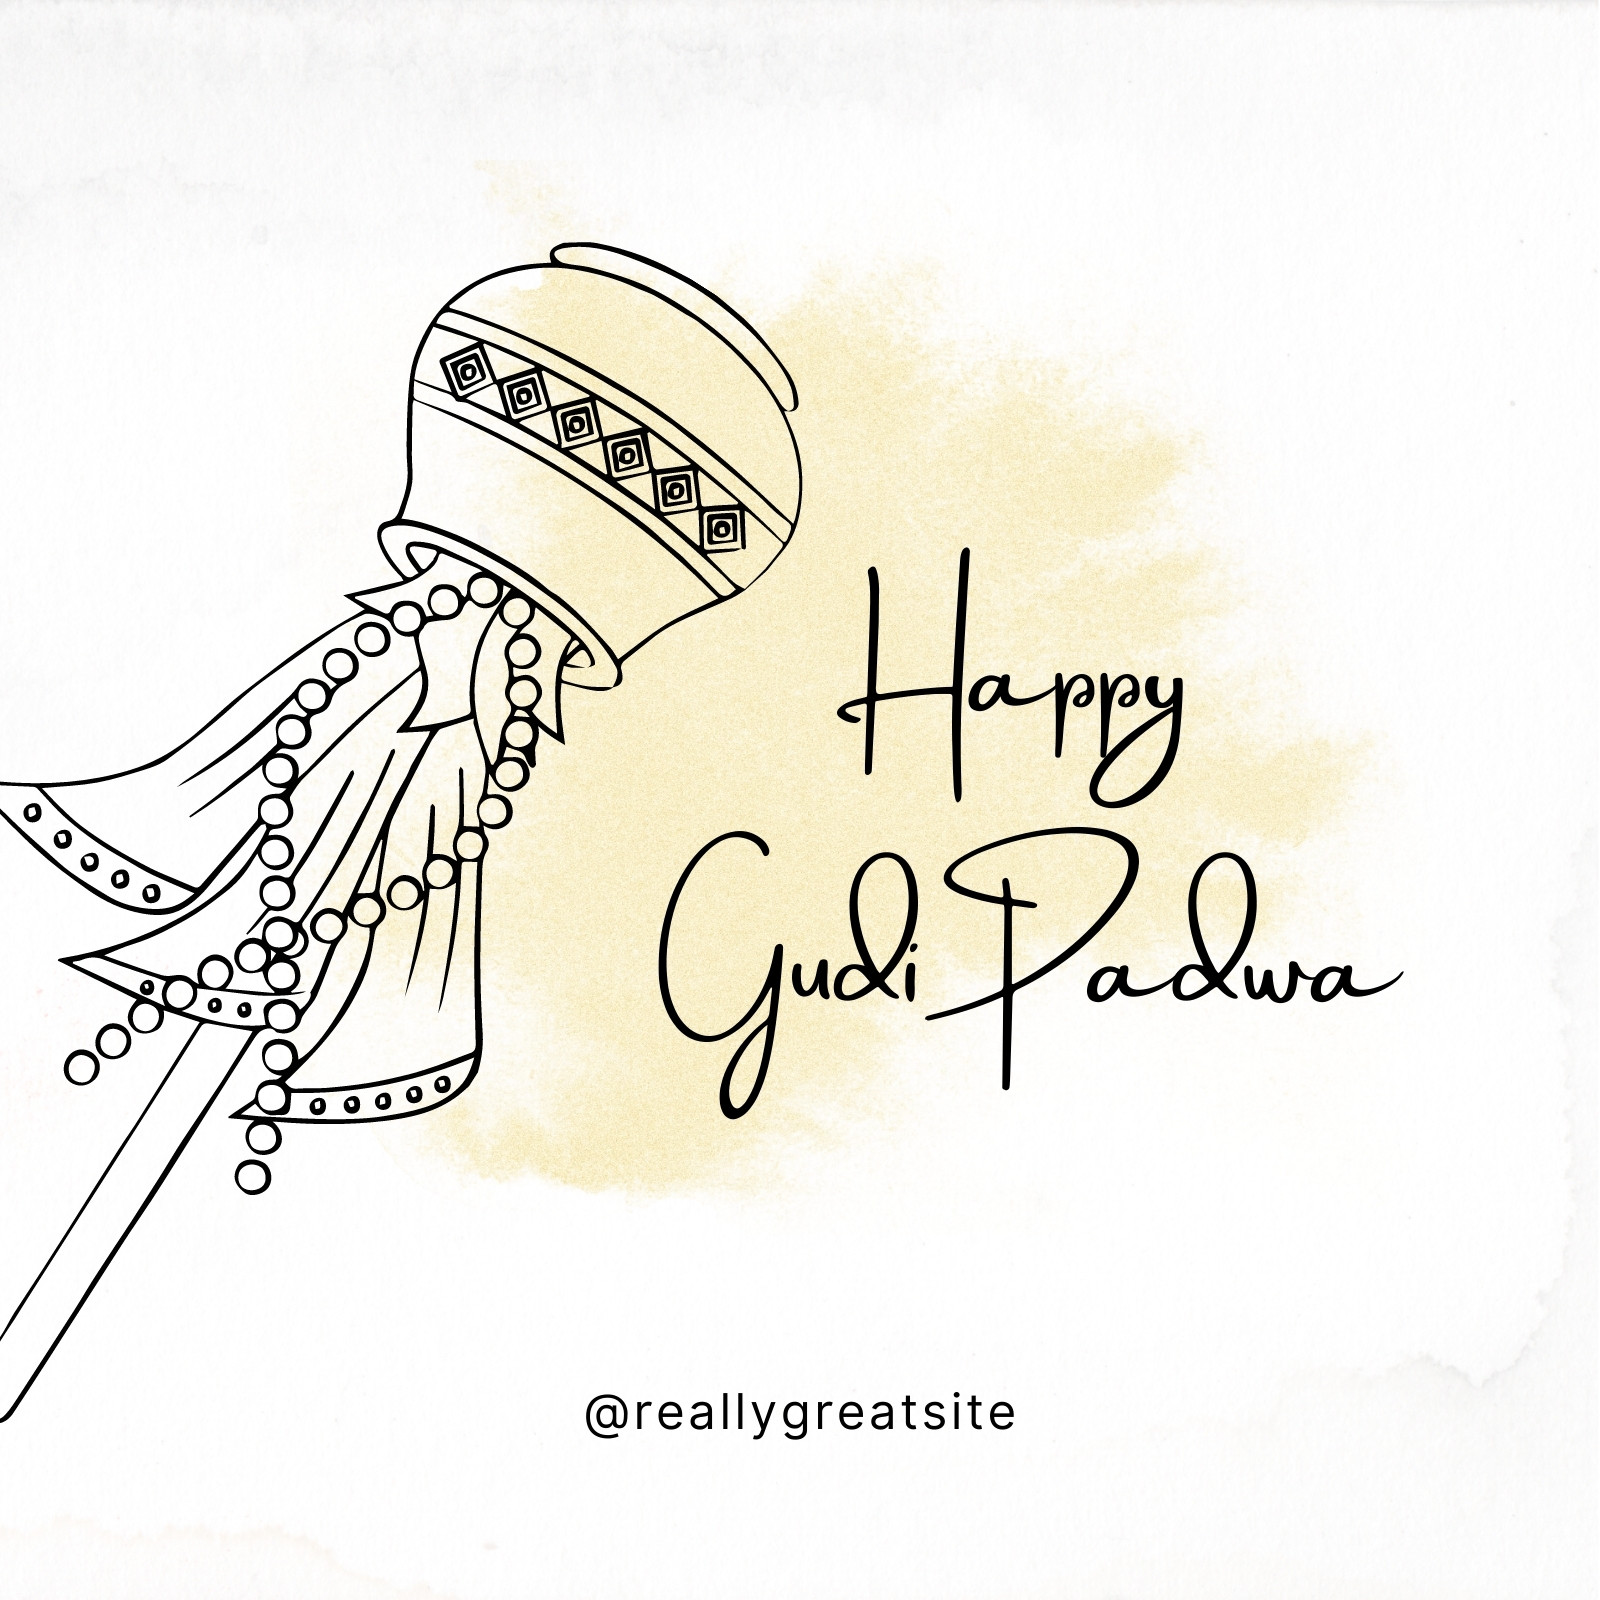 Gudi Padwa Women: Over 120 Royalty-Free Licensable Stock Illustrations &  Drawings | Shutterstock